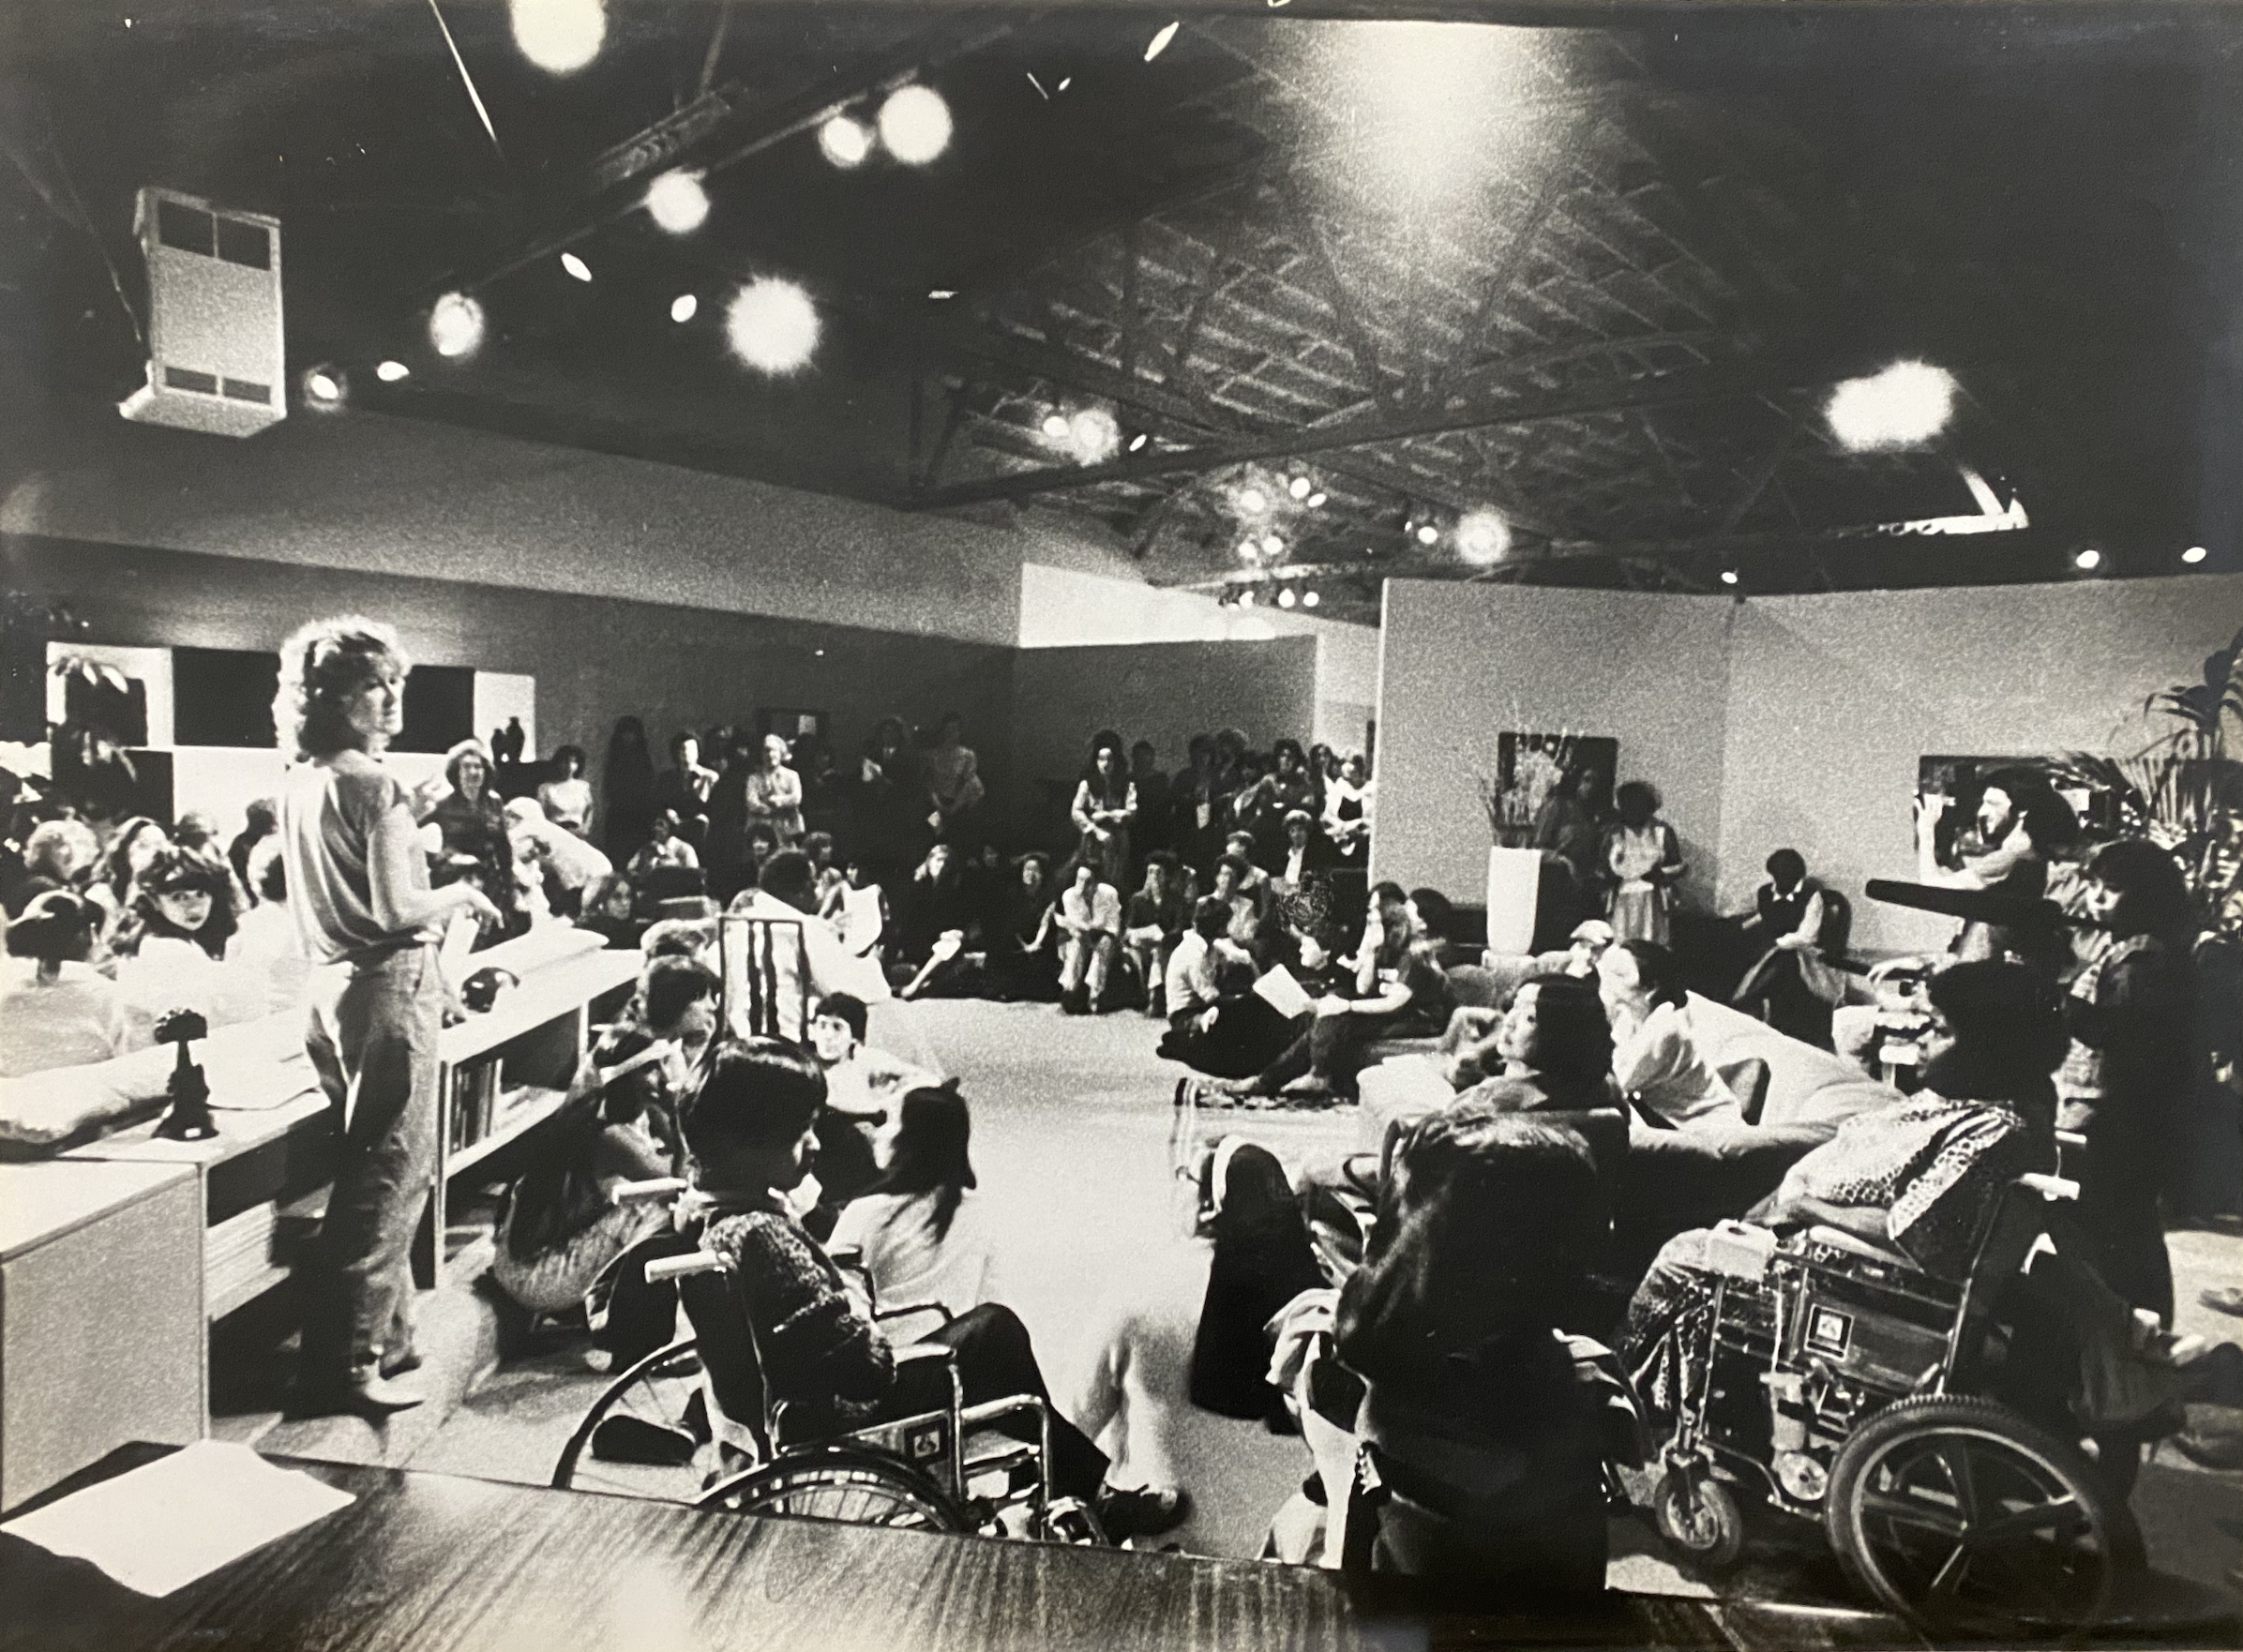 In a black and white image set in the 1970’s, Suzanne Lacy stands to the left of the frame overlooking a room full of people. At the forefront are a group of people in wheelchairs, along the sides people are sitting on a couch. In the background people are standing along the room while others are sitting on the floor creating an oblong empty space in the center.